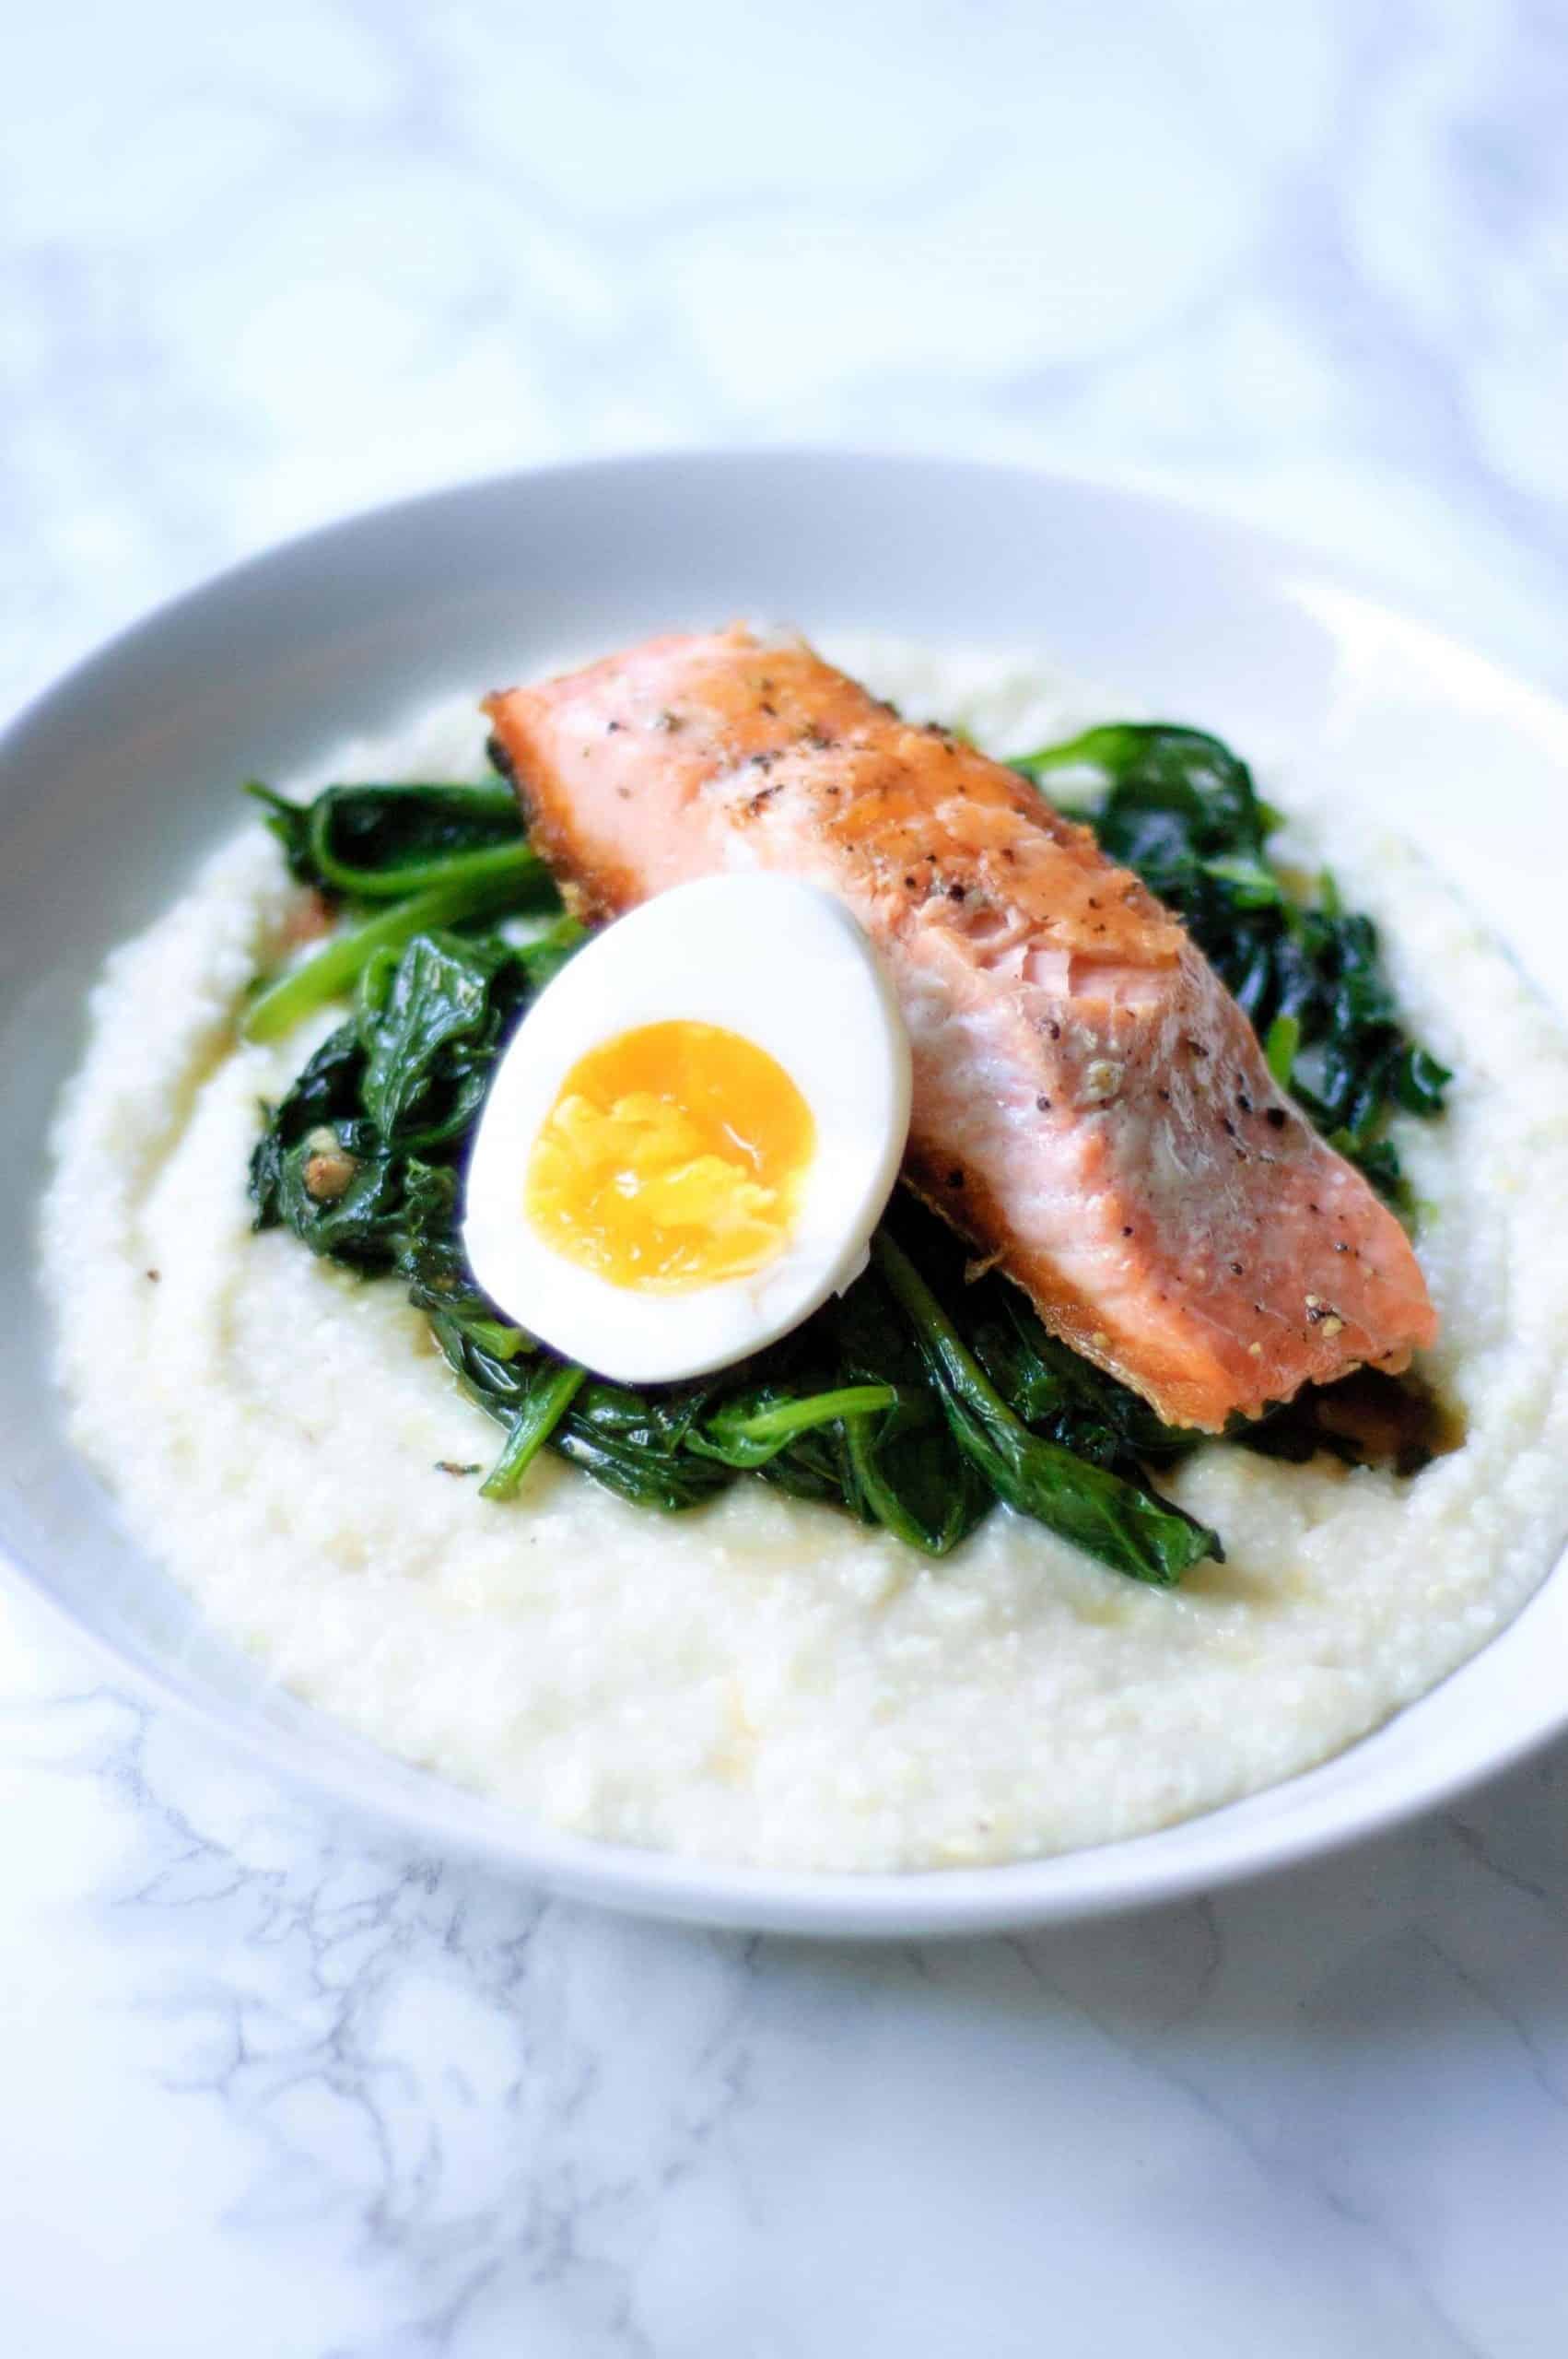 Salmon and Grits with Garlicky Greens & Boiled Eggs